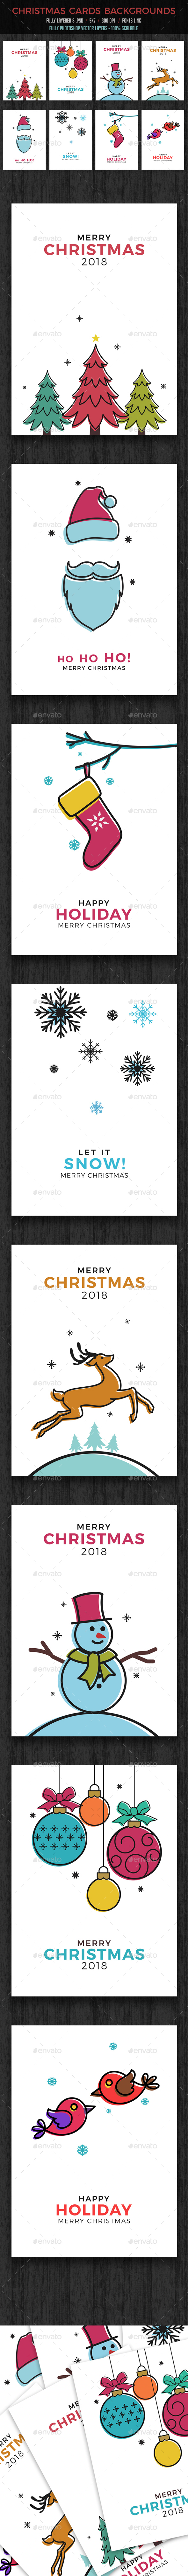 GraphicRiver Christmas Cards Backgrounds 20829090